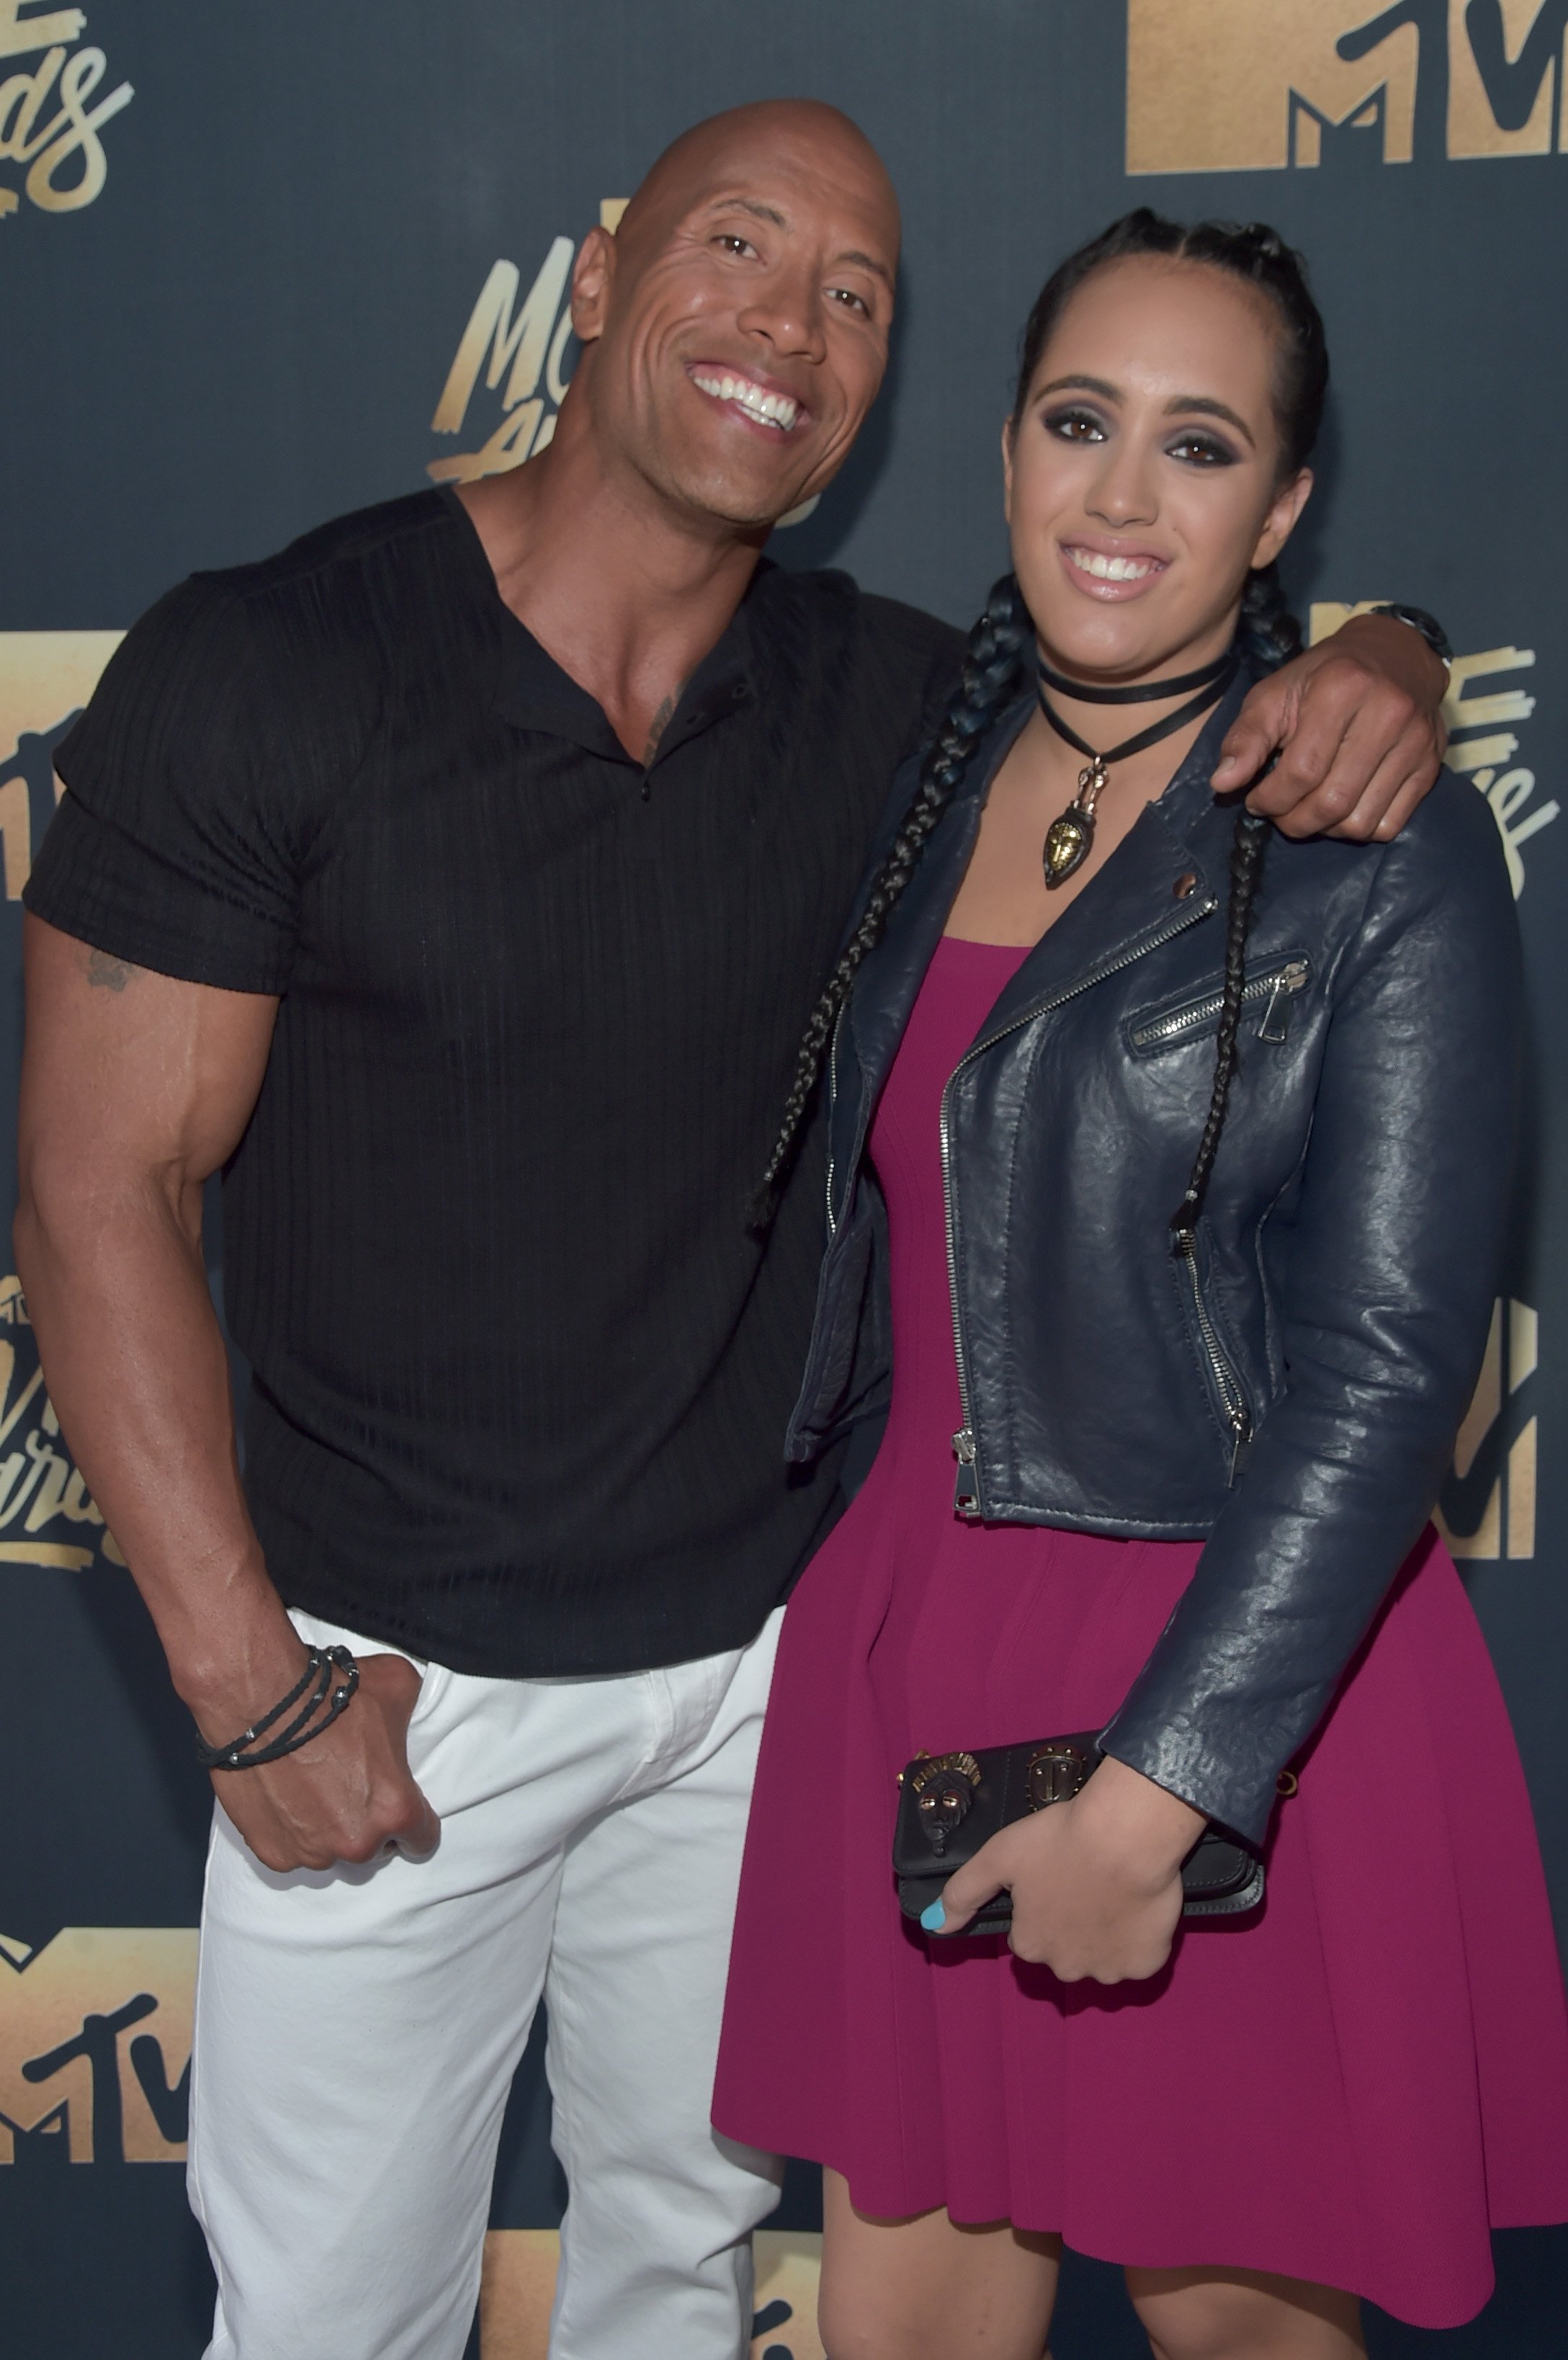 Dwayne Johnson and his daughter, Simone Alexandra Johnson attend the 2016 MTV Movie Awards at Warner Bros. Studios on April 9, 2016 in Burbank, California | Photo: Getty Images